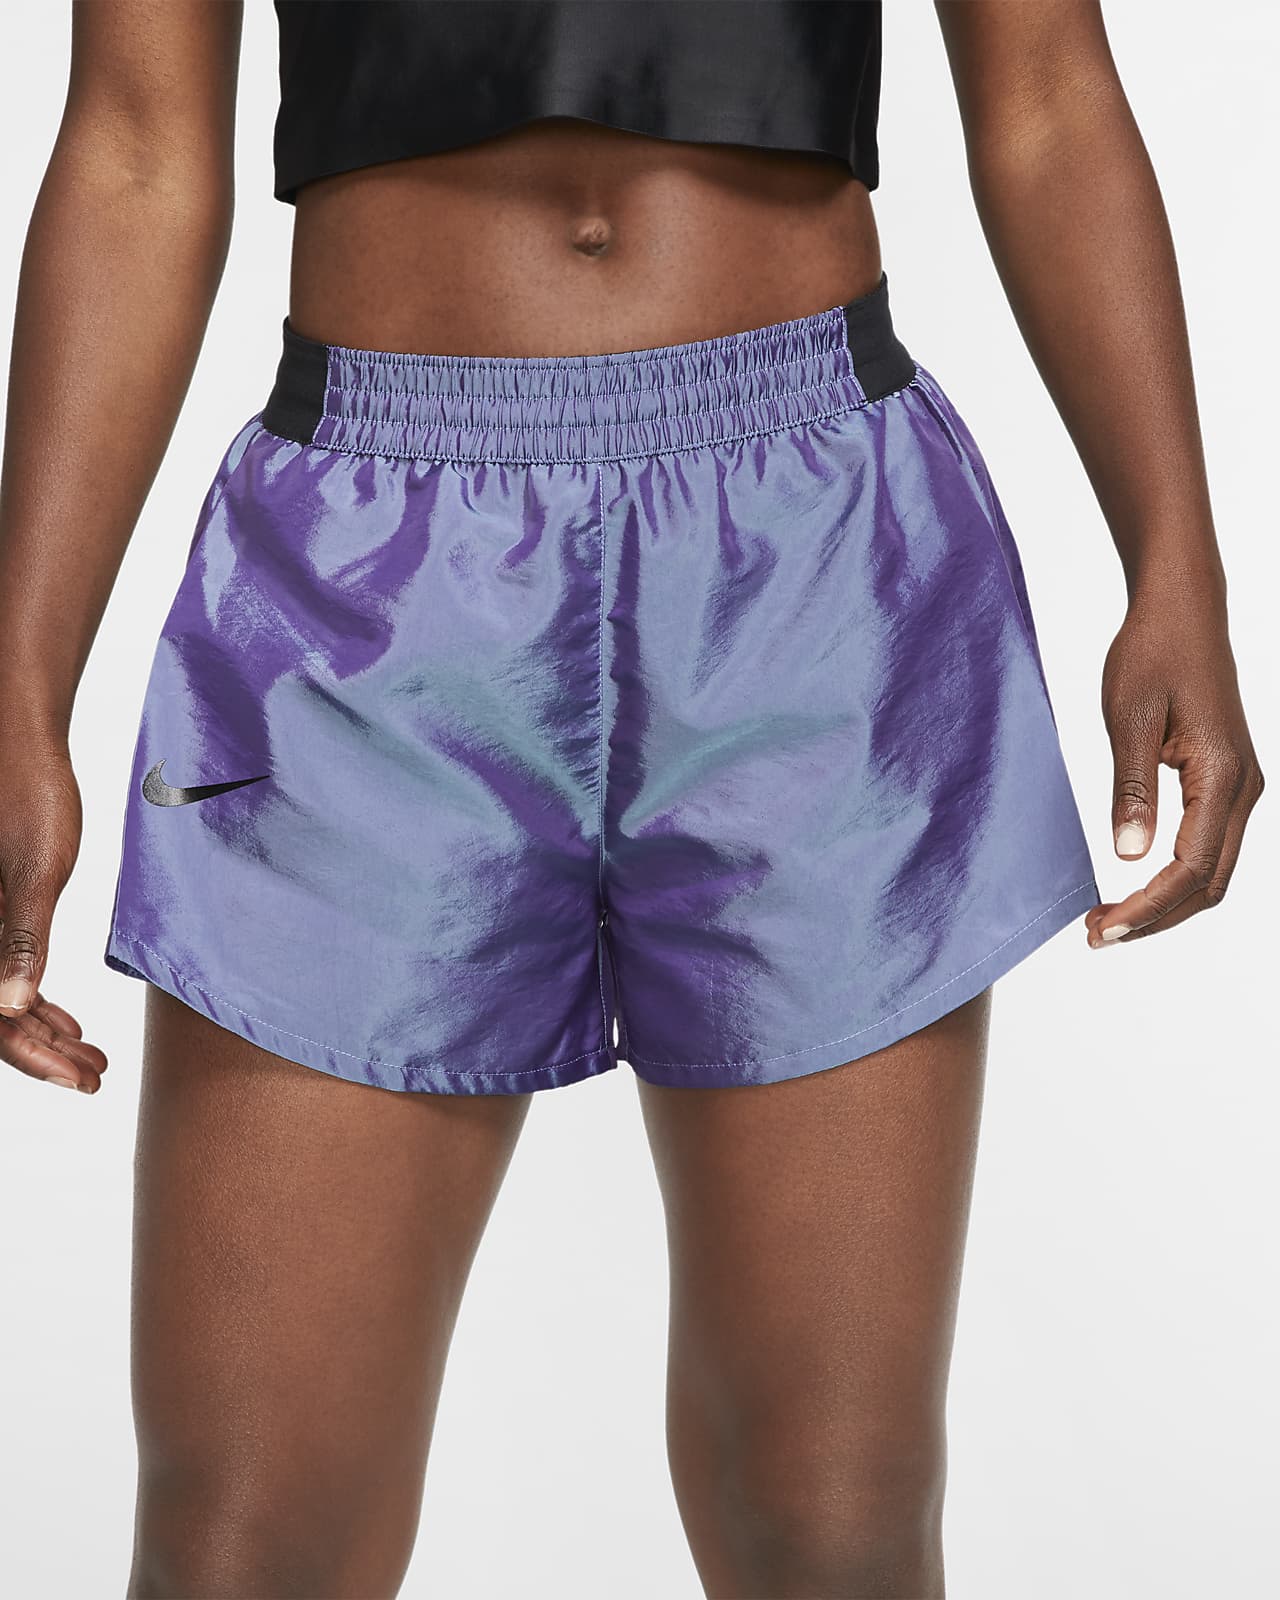 nike lux tempo shorts